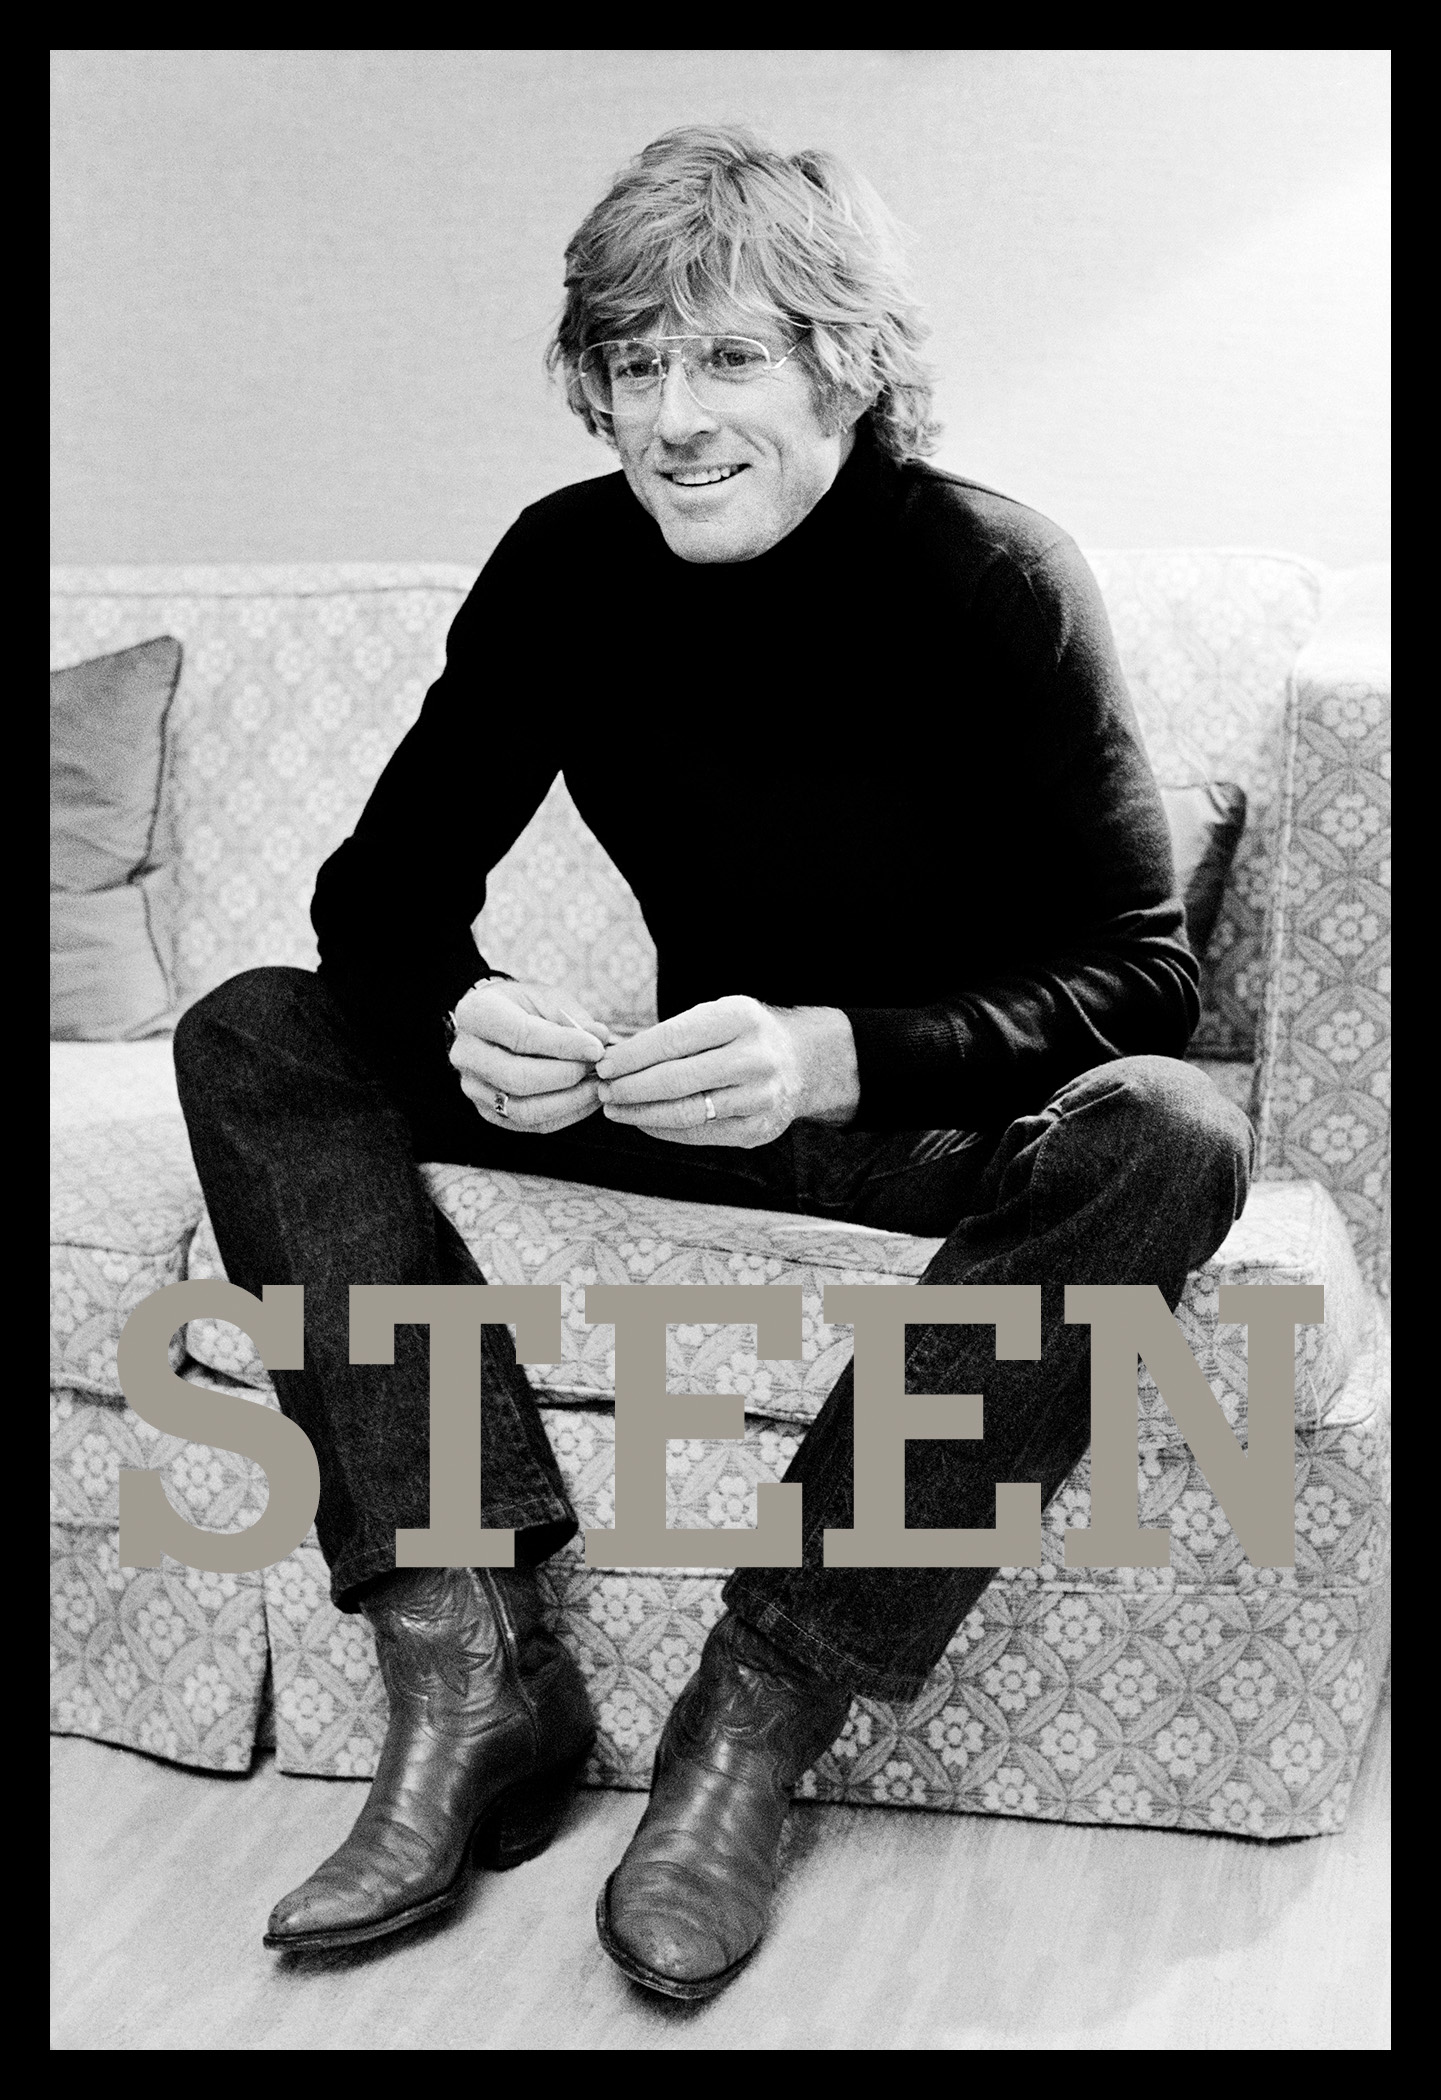 an exclusive limited edition black and white photograph of the american actor robert redford captured by british photographer david steen